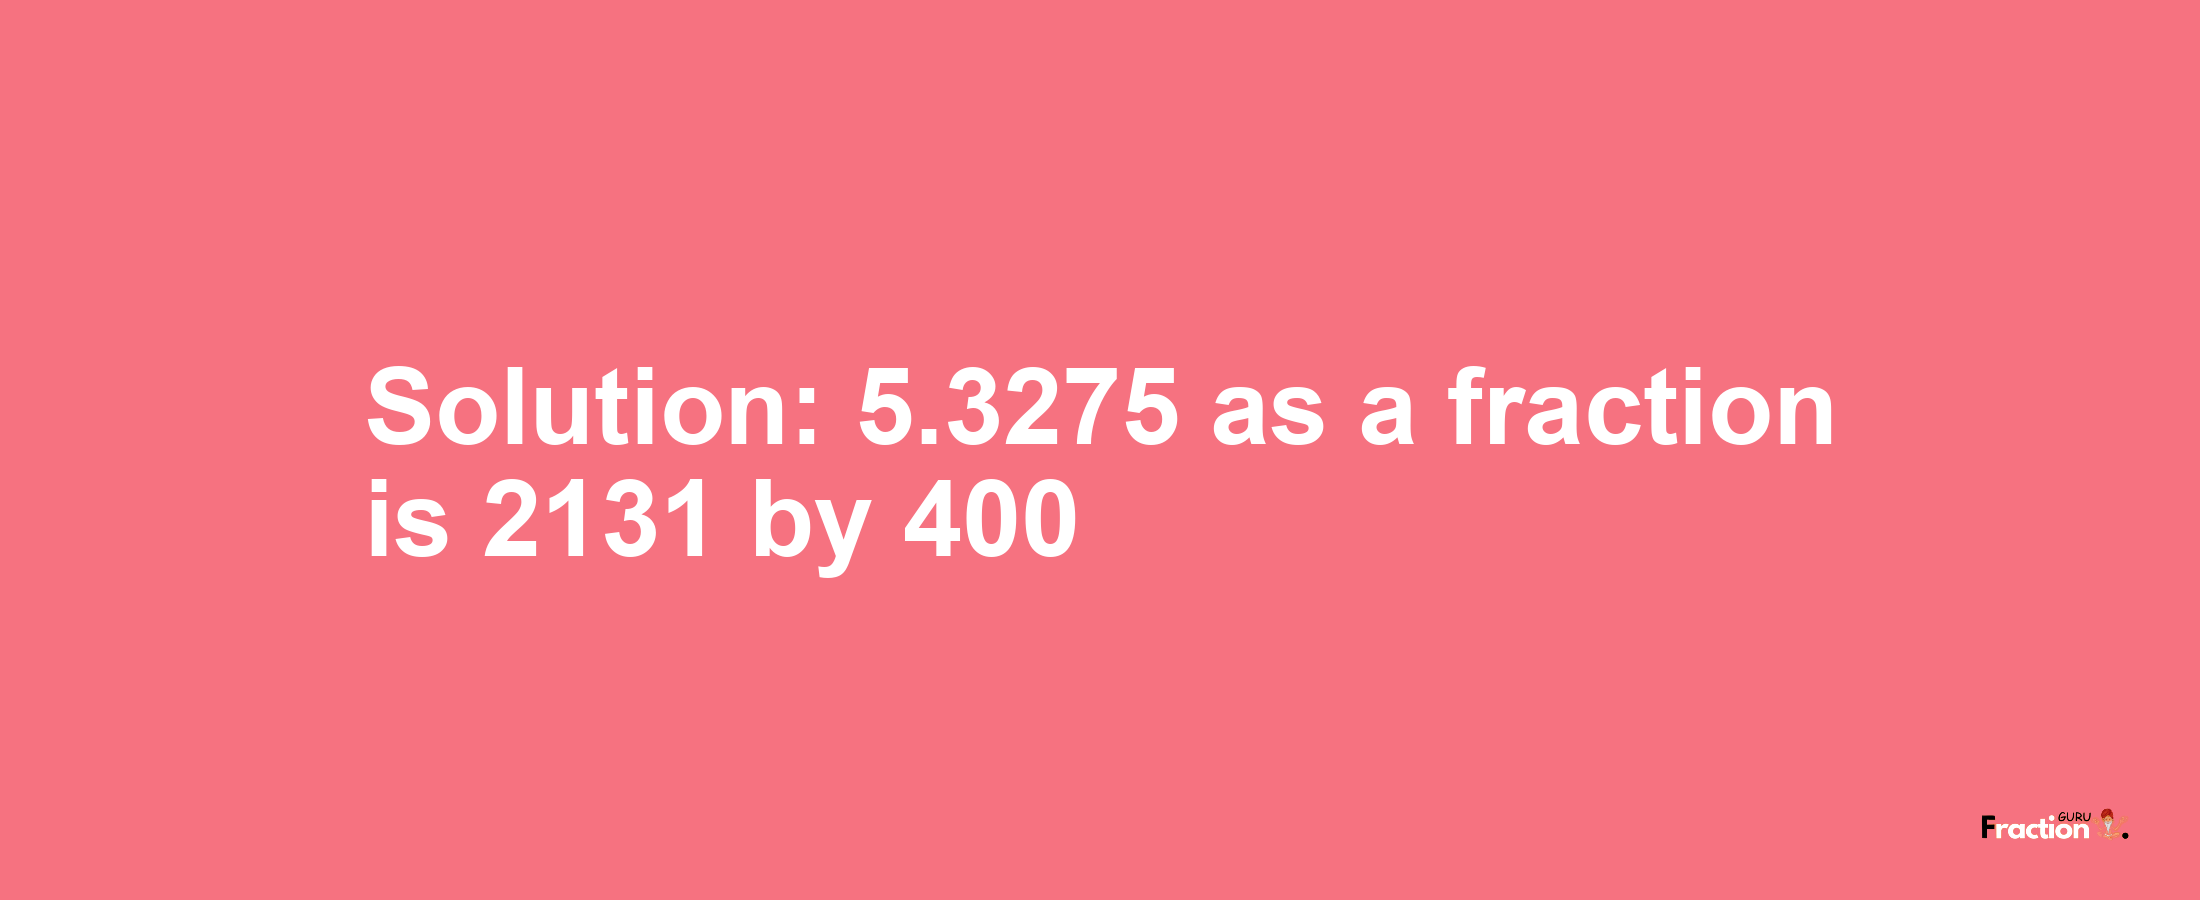 Solution:5.3275 as a fraction is 2131/400